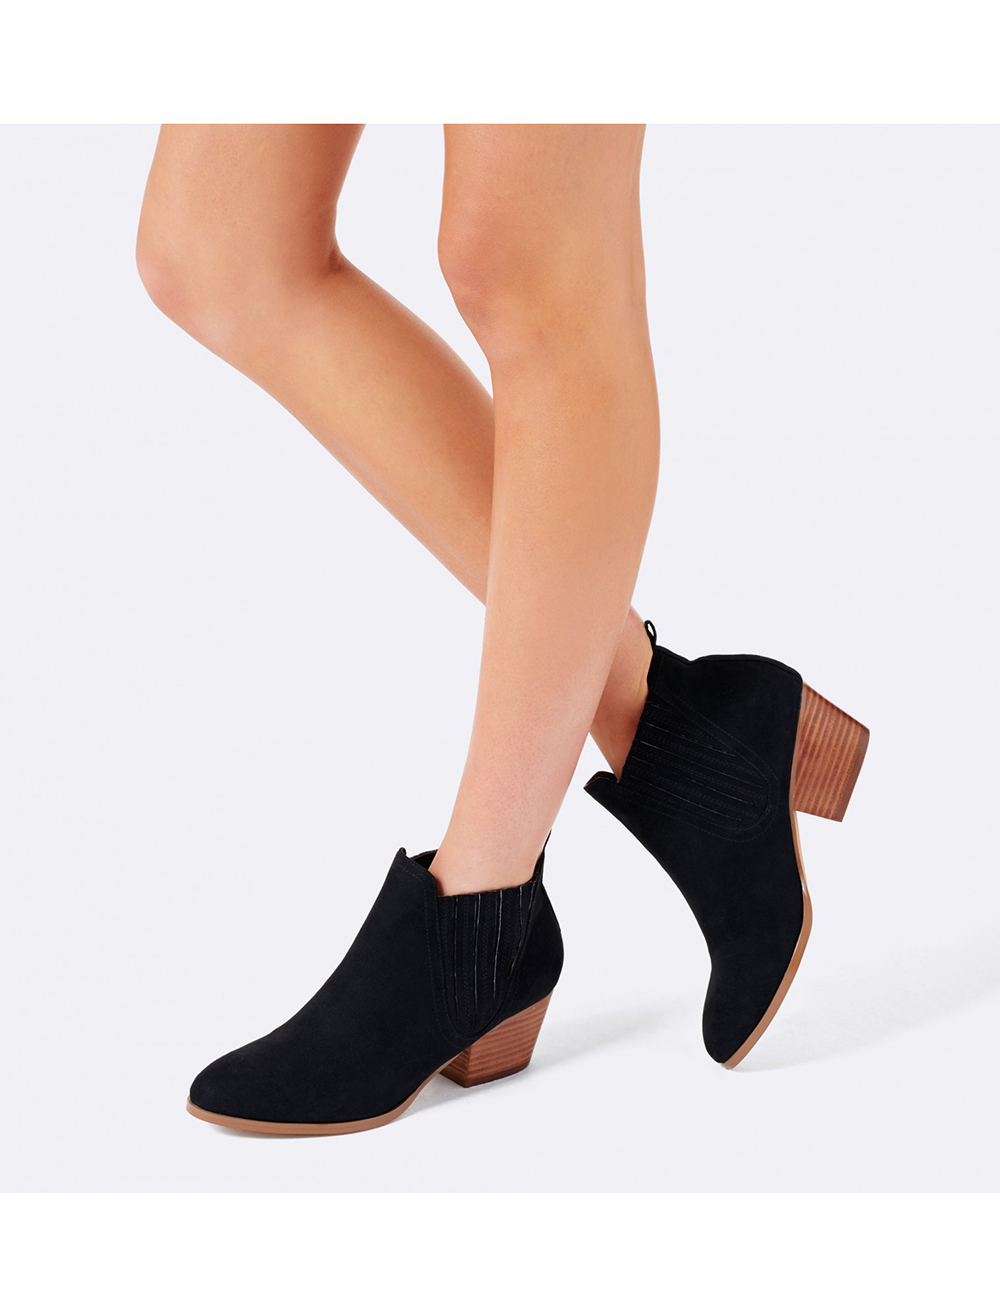 Forever New boots, $86